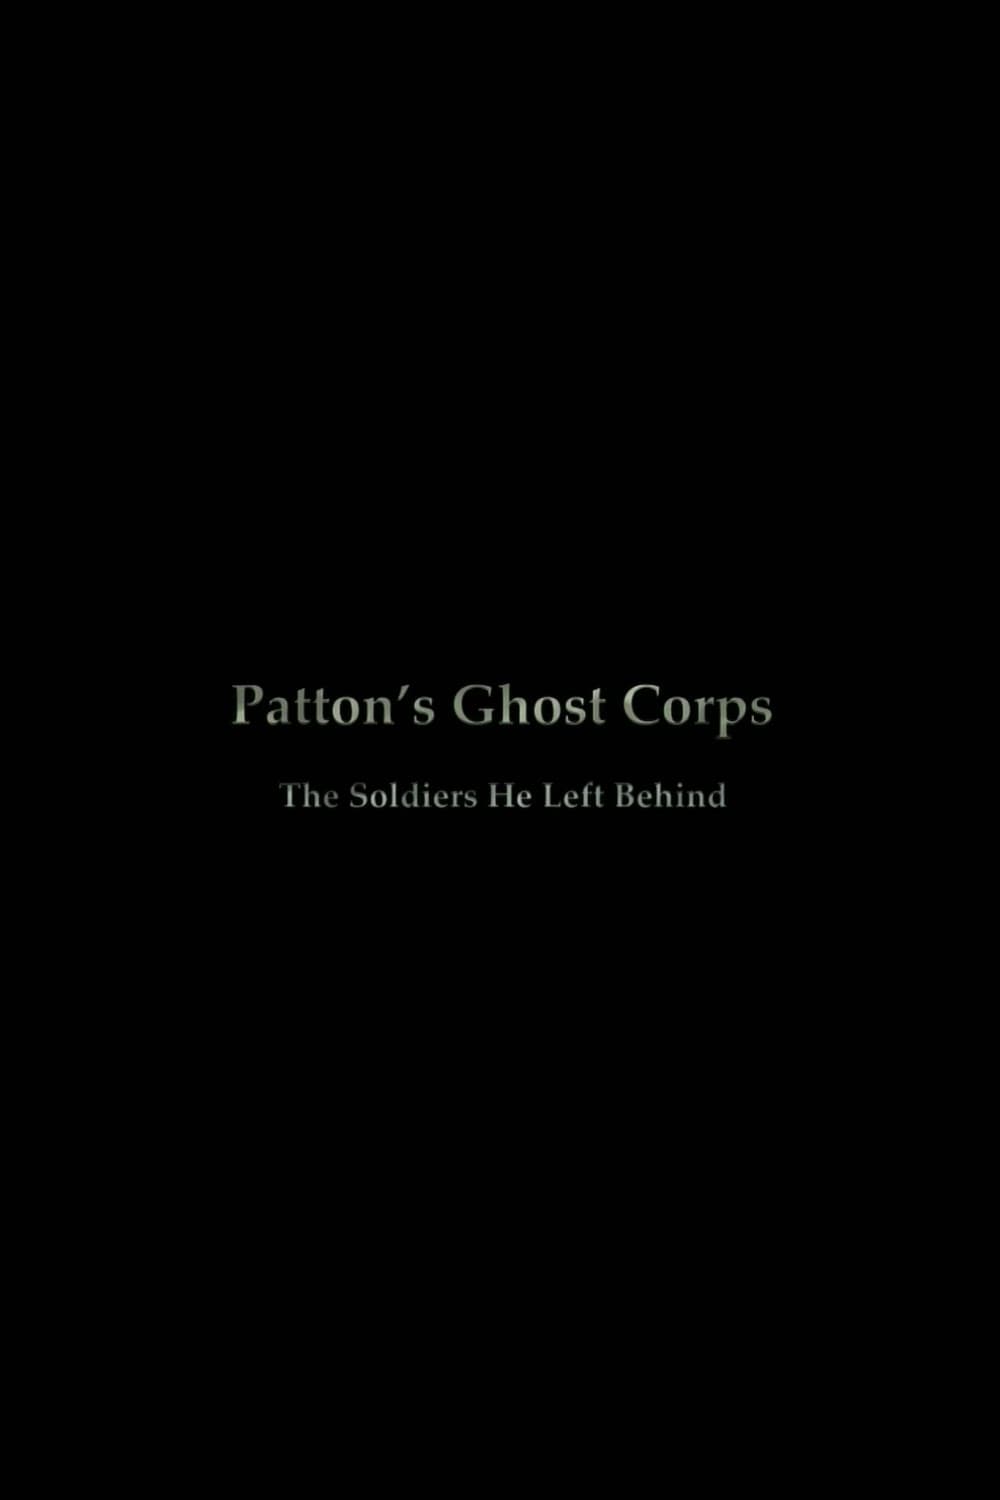 Patton's Ghost Corps